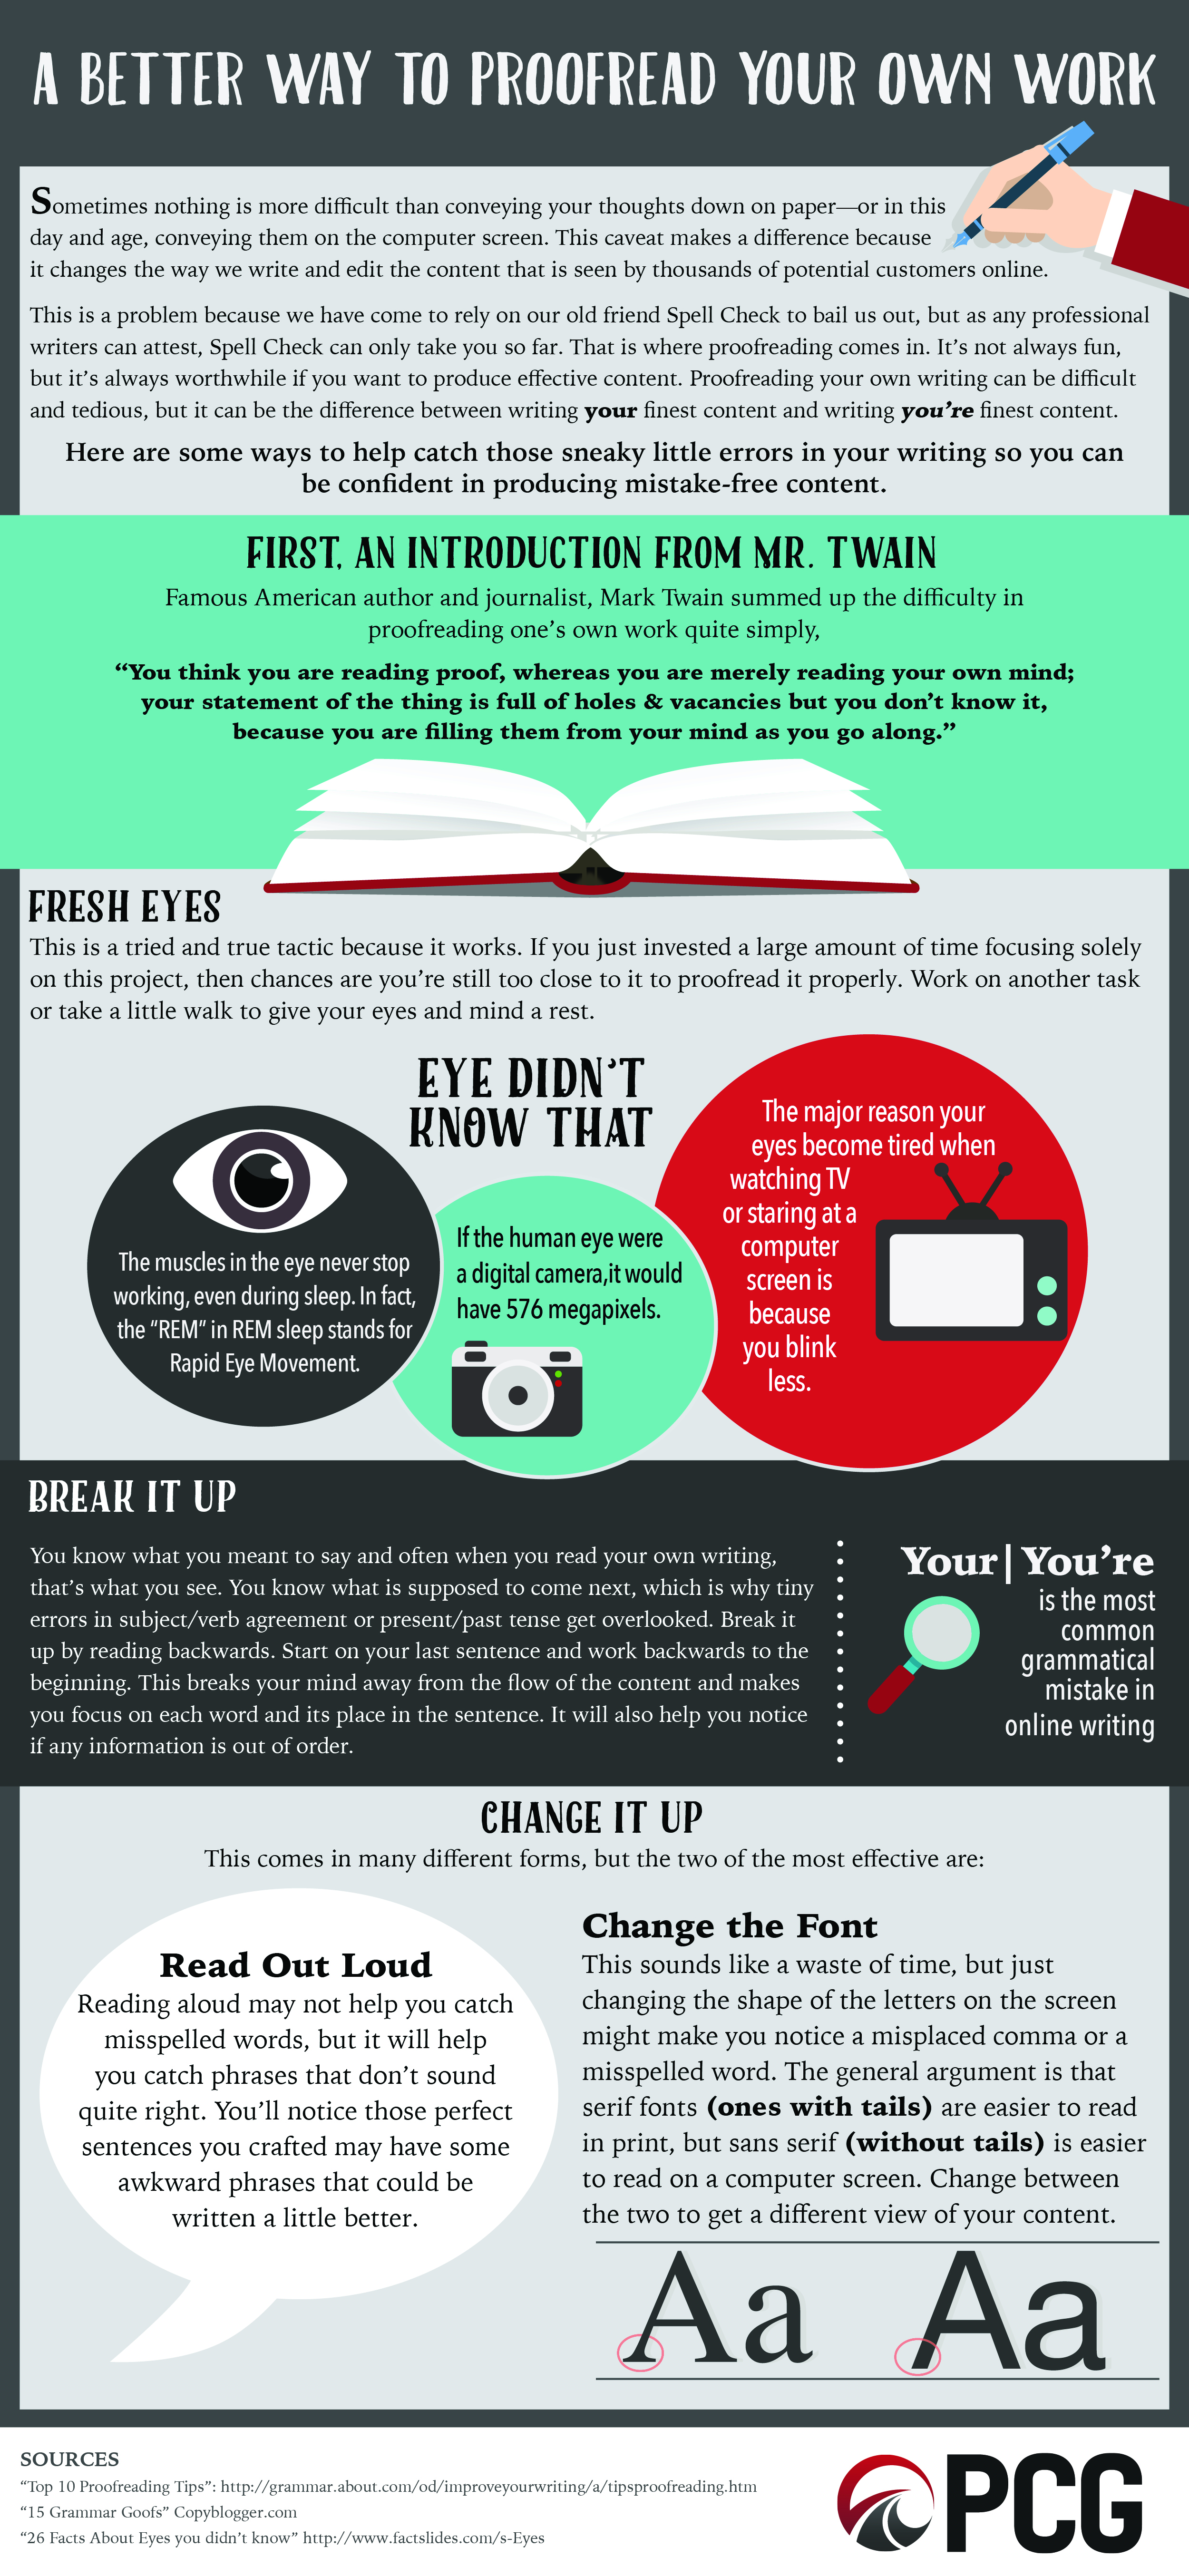 Proofreading-Own-Work-Infographic